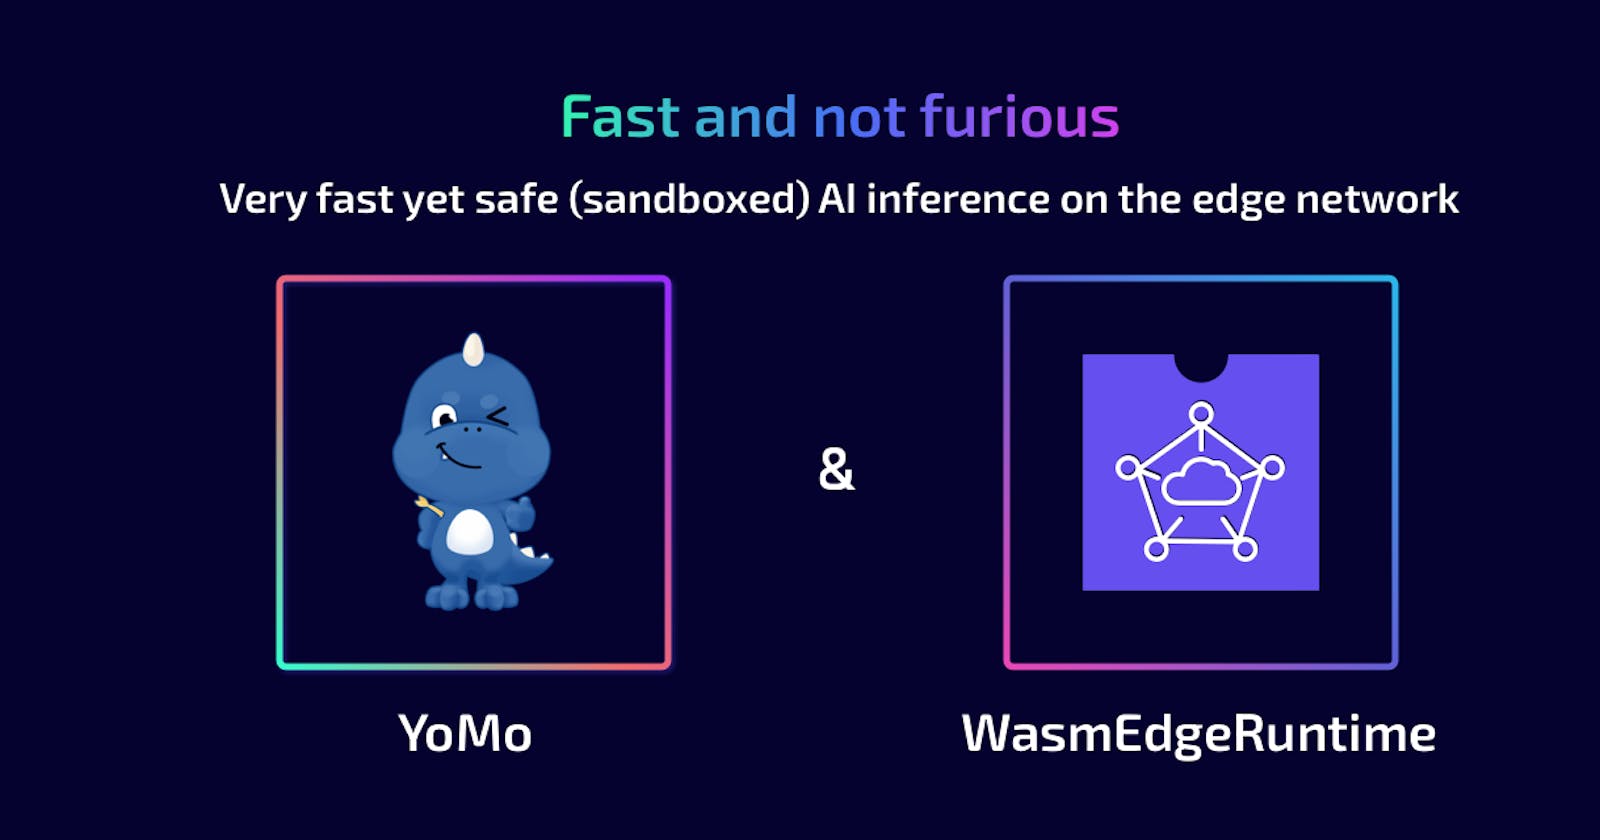 What is YoMo? And how is it going to change the world?